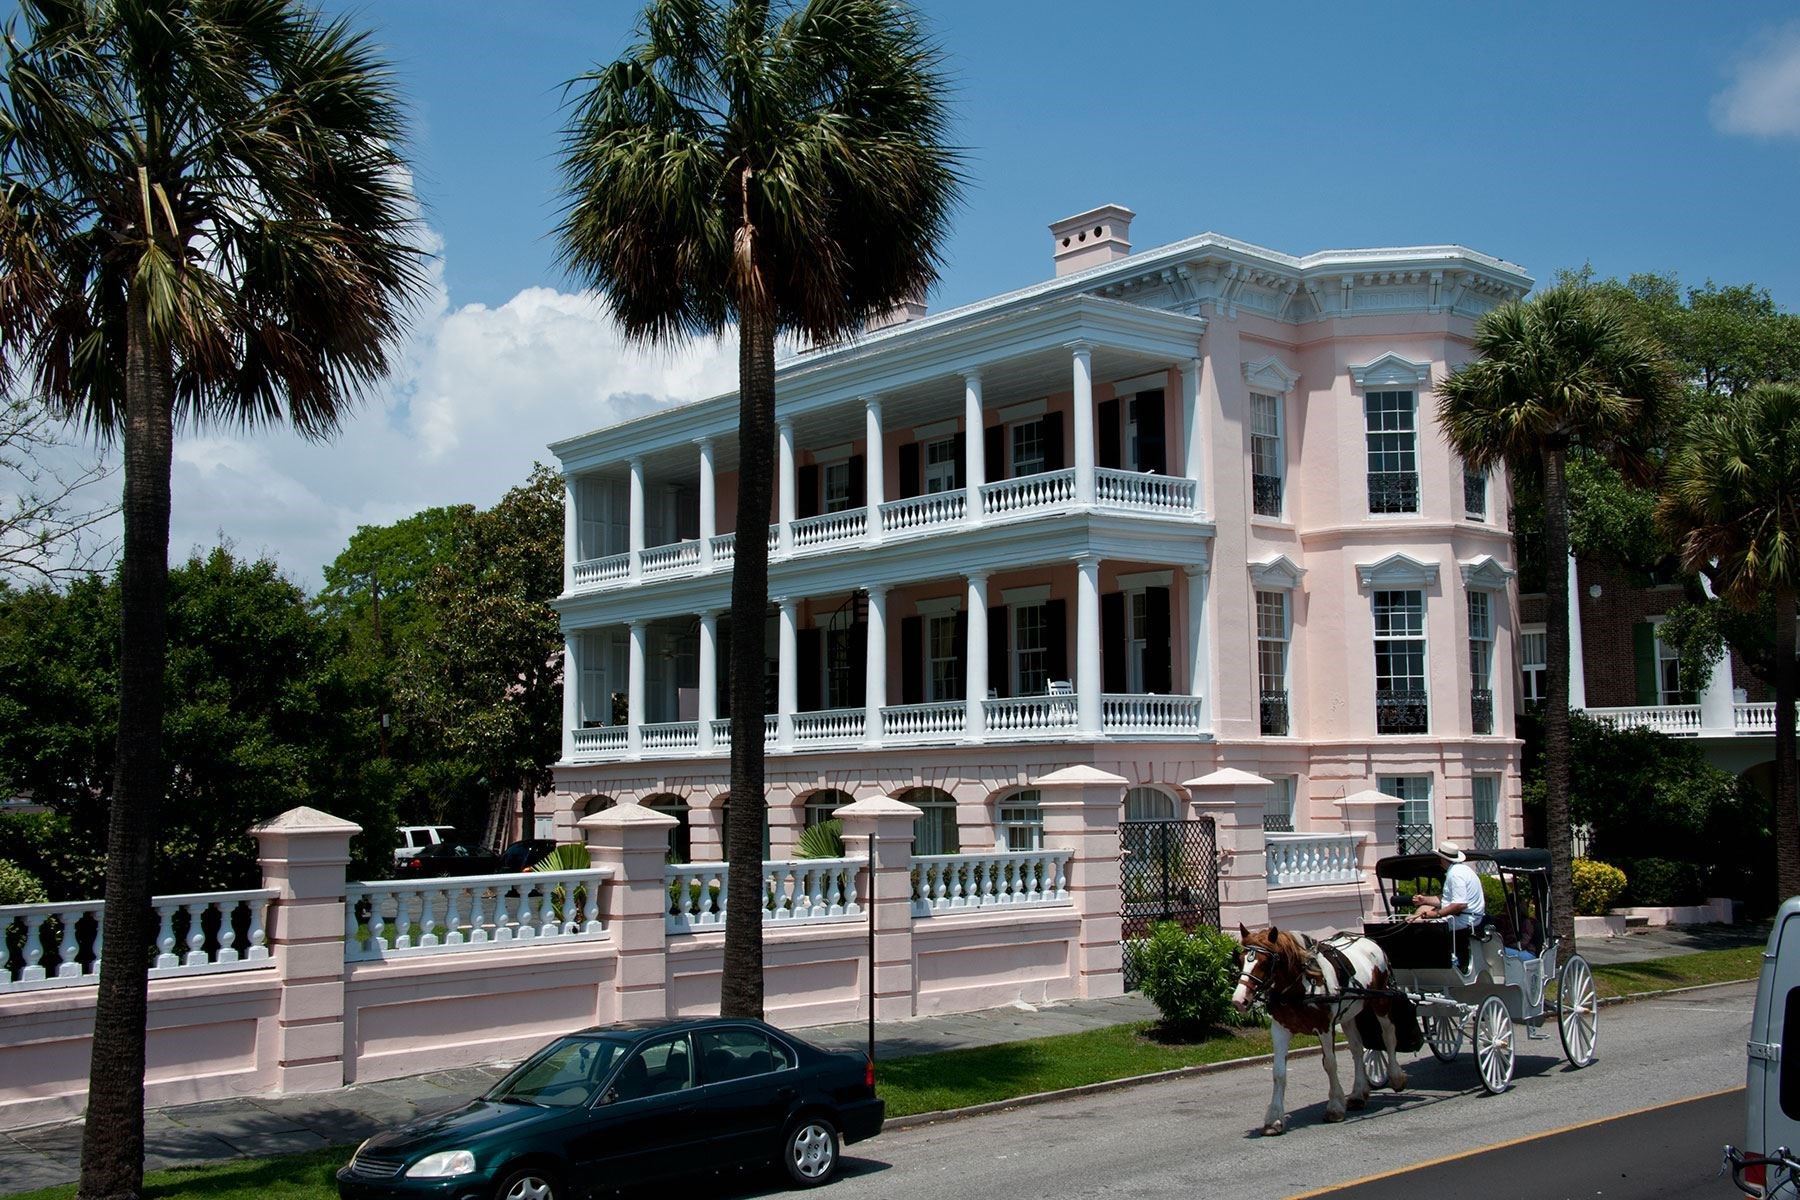 Up one place from last year's rankings, domestic tourists in the US are big fans of Southern hospitality. The historic town of Charleston is praised as a "quaint and special little gem", filled with natural beauty and "incredible food".